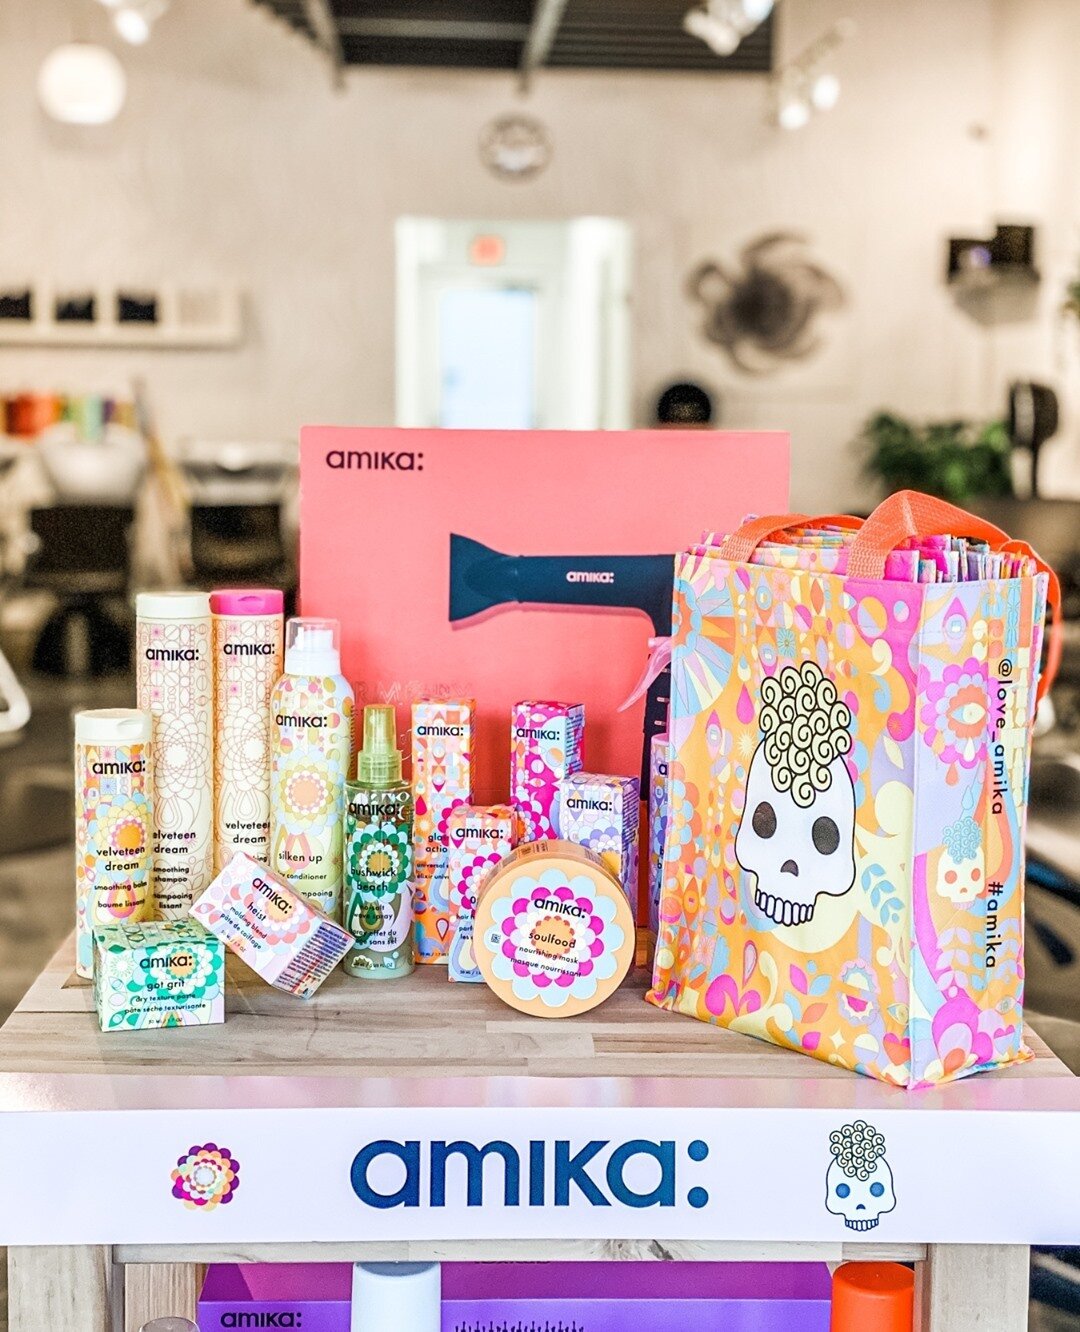 Have you met Amika yet?⁠
⁠
These cute colorful bottles and tubs, hold magical ingredients to take you hair to the next level! ⁠
Whatever you hair issue might be, there is a solution with Amika!⁠
⁠
Next time you are in the shop, browse the full line a